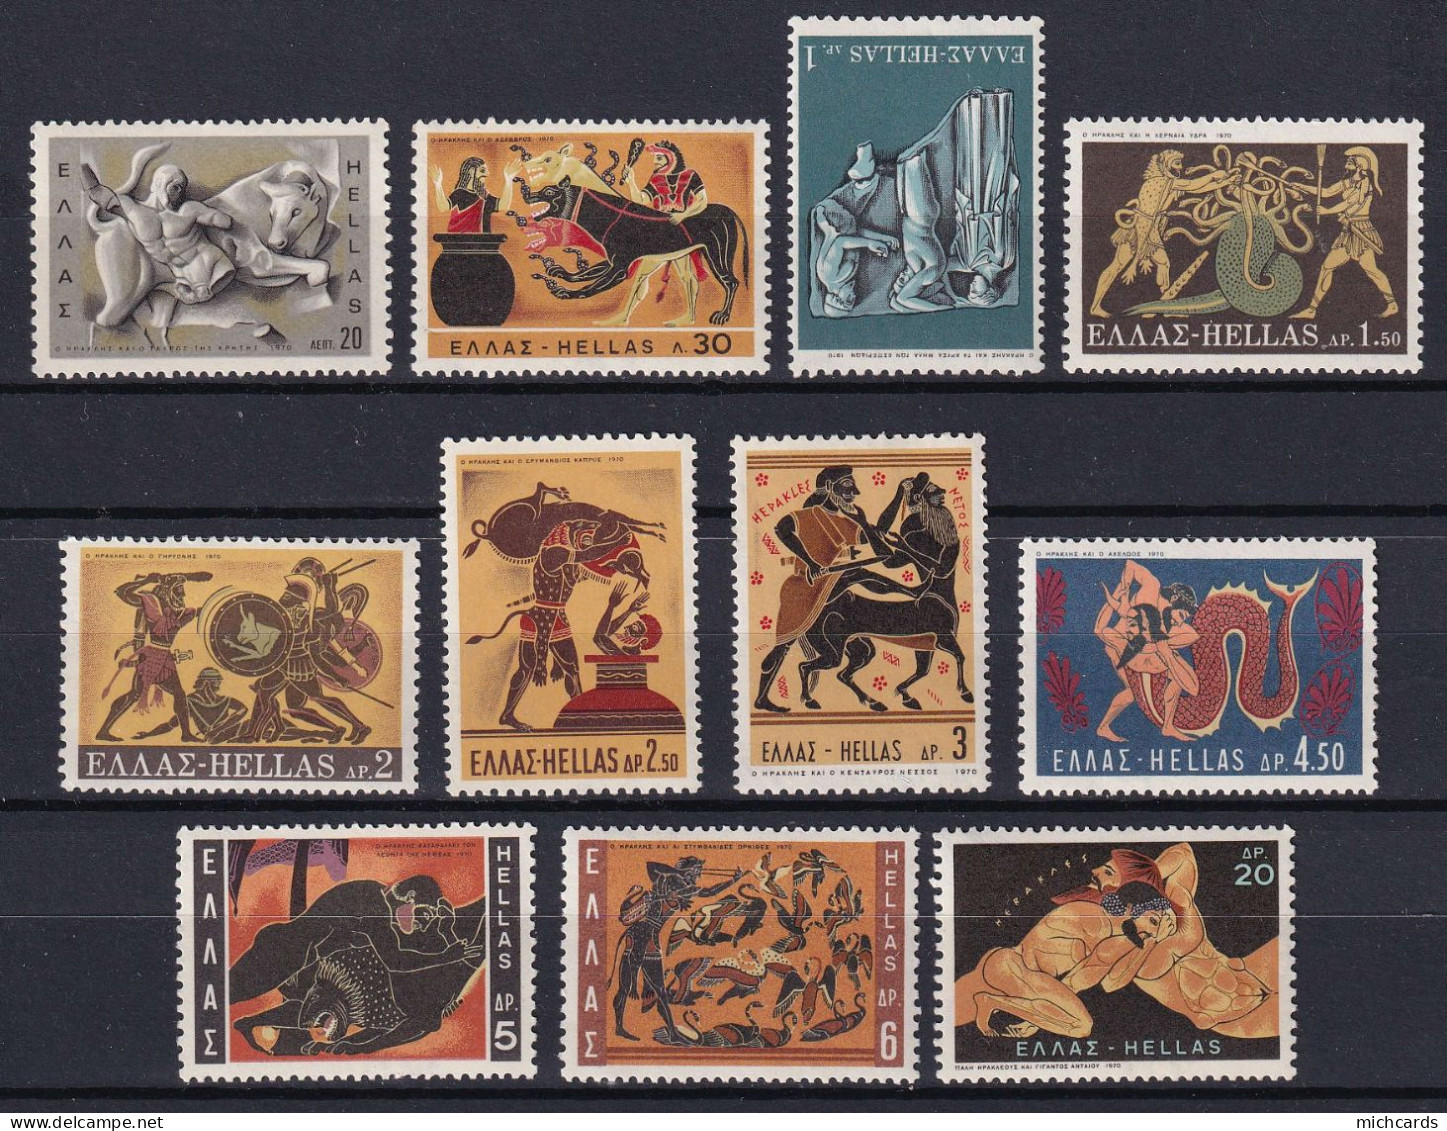 175 GRECE 1970 - Y&T 1007/17 - Heracles Mythologie - Neuf ** (MNH) Sans Charniere - Unused Stamps